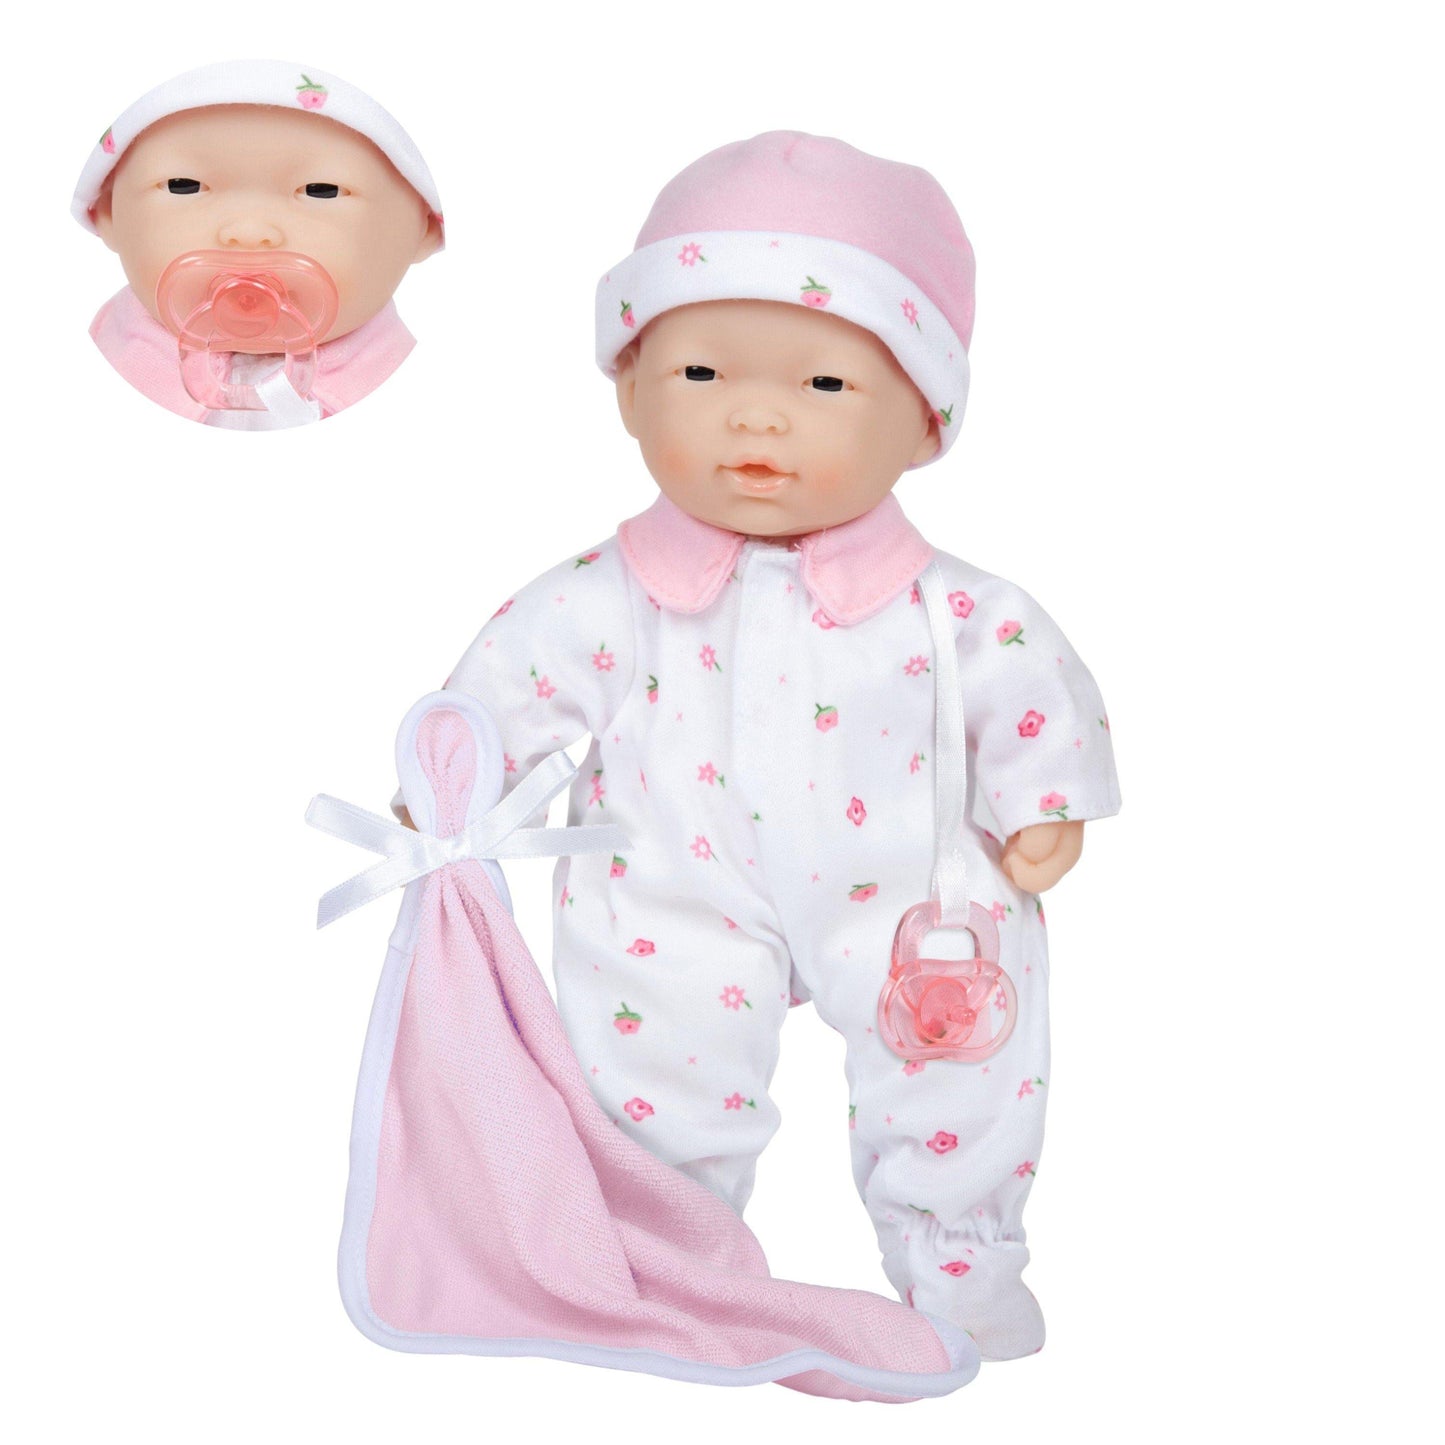 JC Toys, La Baby 11 inch Soft Body Asian Baby Doll in Pink Outfit - JC Toys Group Inc.